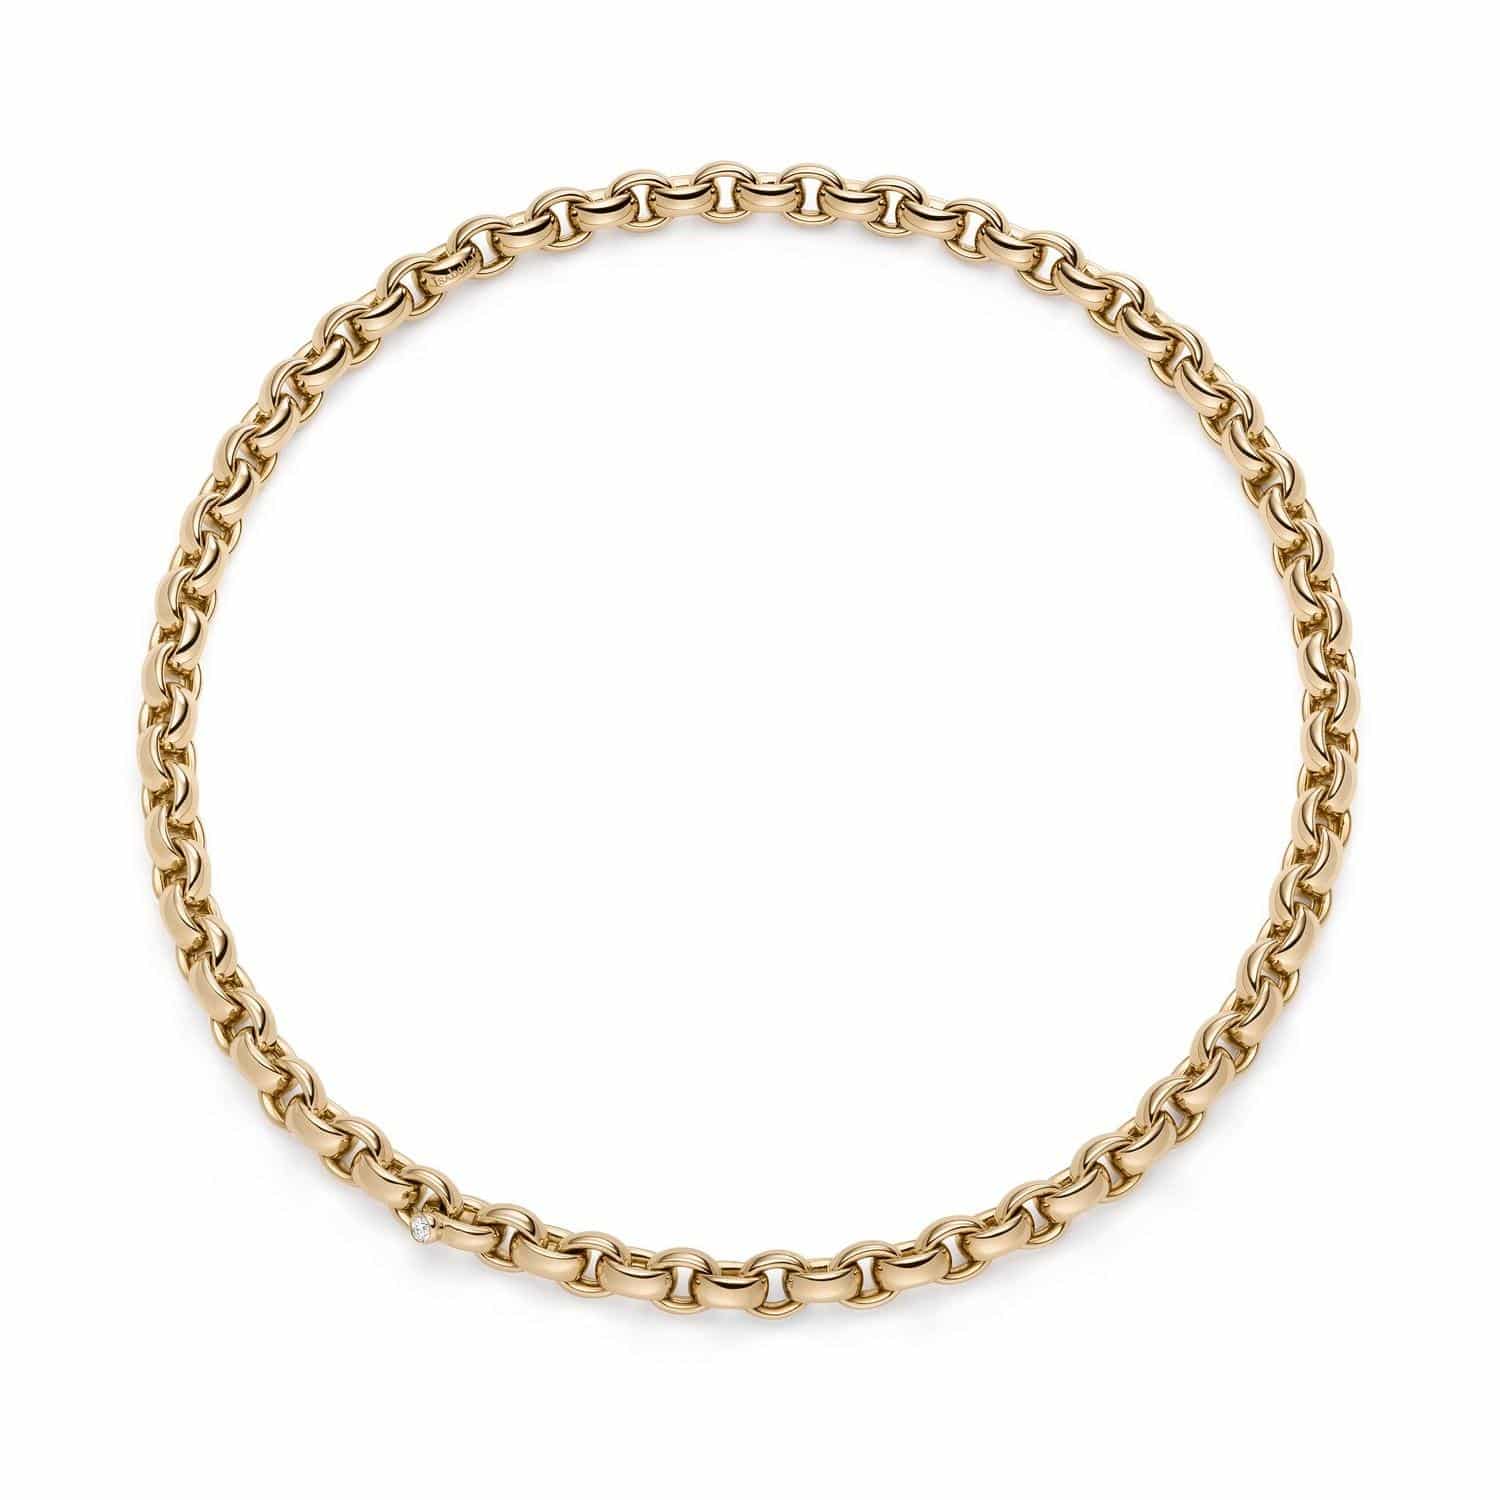 ISABELLE FA COLLIER "CHACHA 8" - 04108-45BKL-ROS